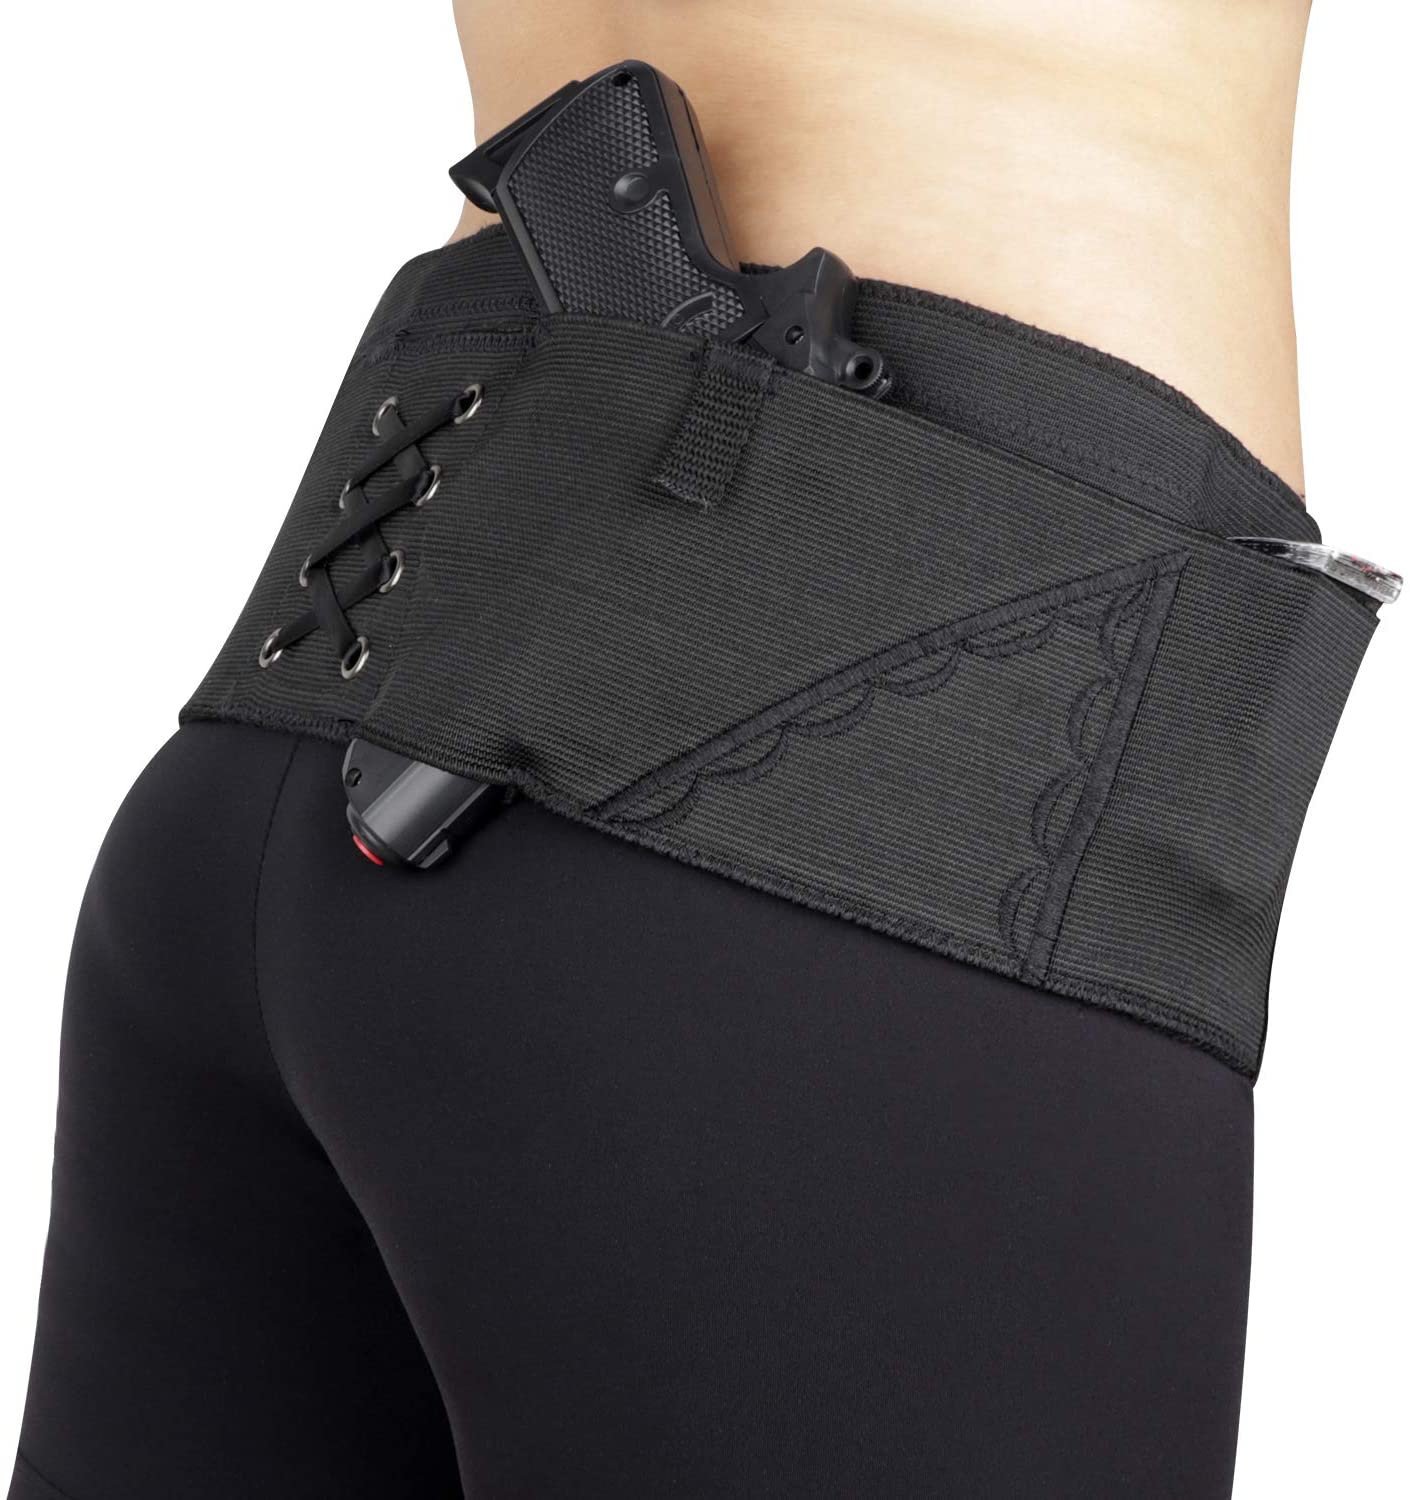 Belly Band Holster - Athena's Armory